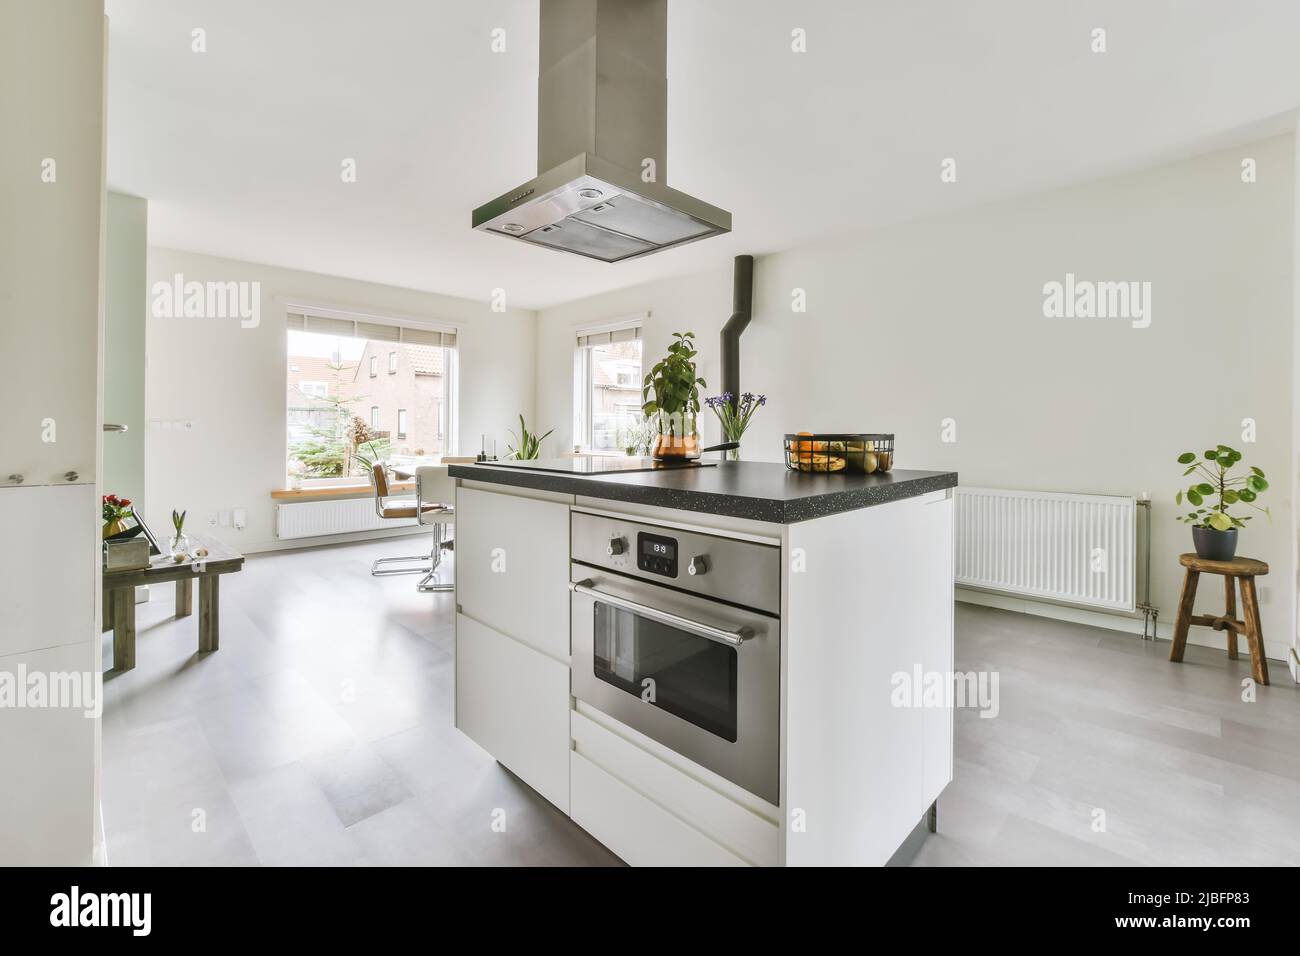 Built in oven in kitchen island under hood in spacious light apartment with white walls and laminate floor in daytime Stock Photo